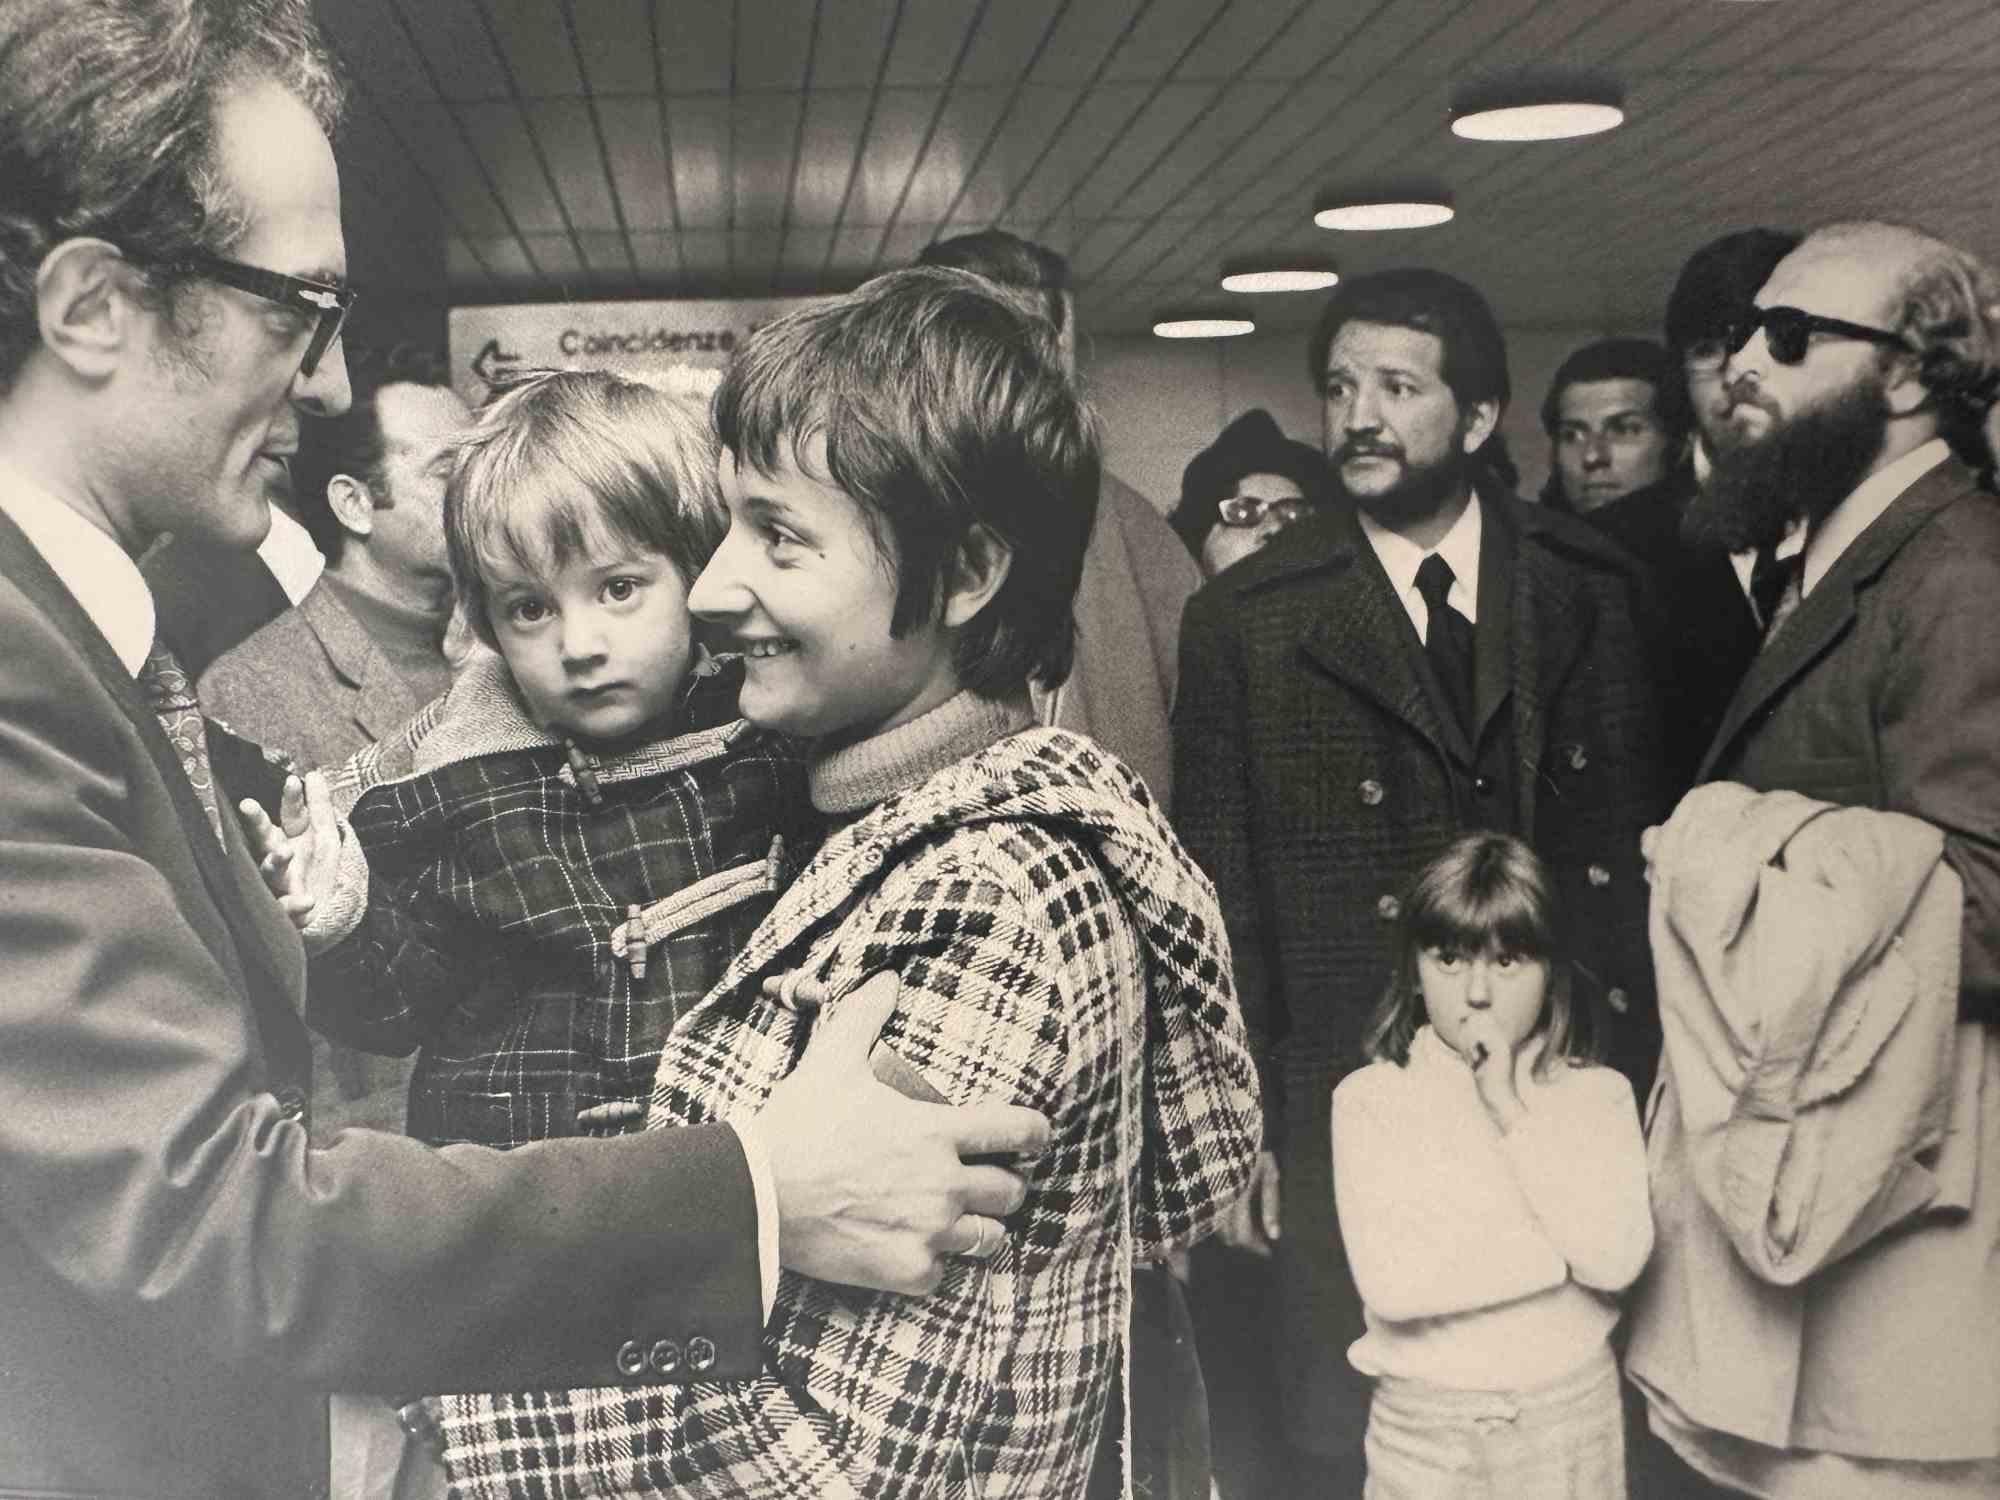 Unknown Figurative Photograph - Historical Photo - Family at the Airport - Vintage photo - 1970s